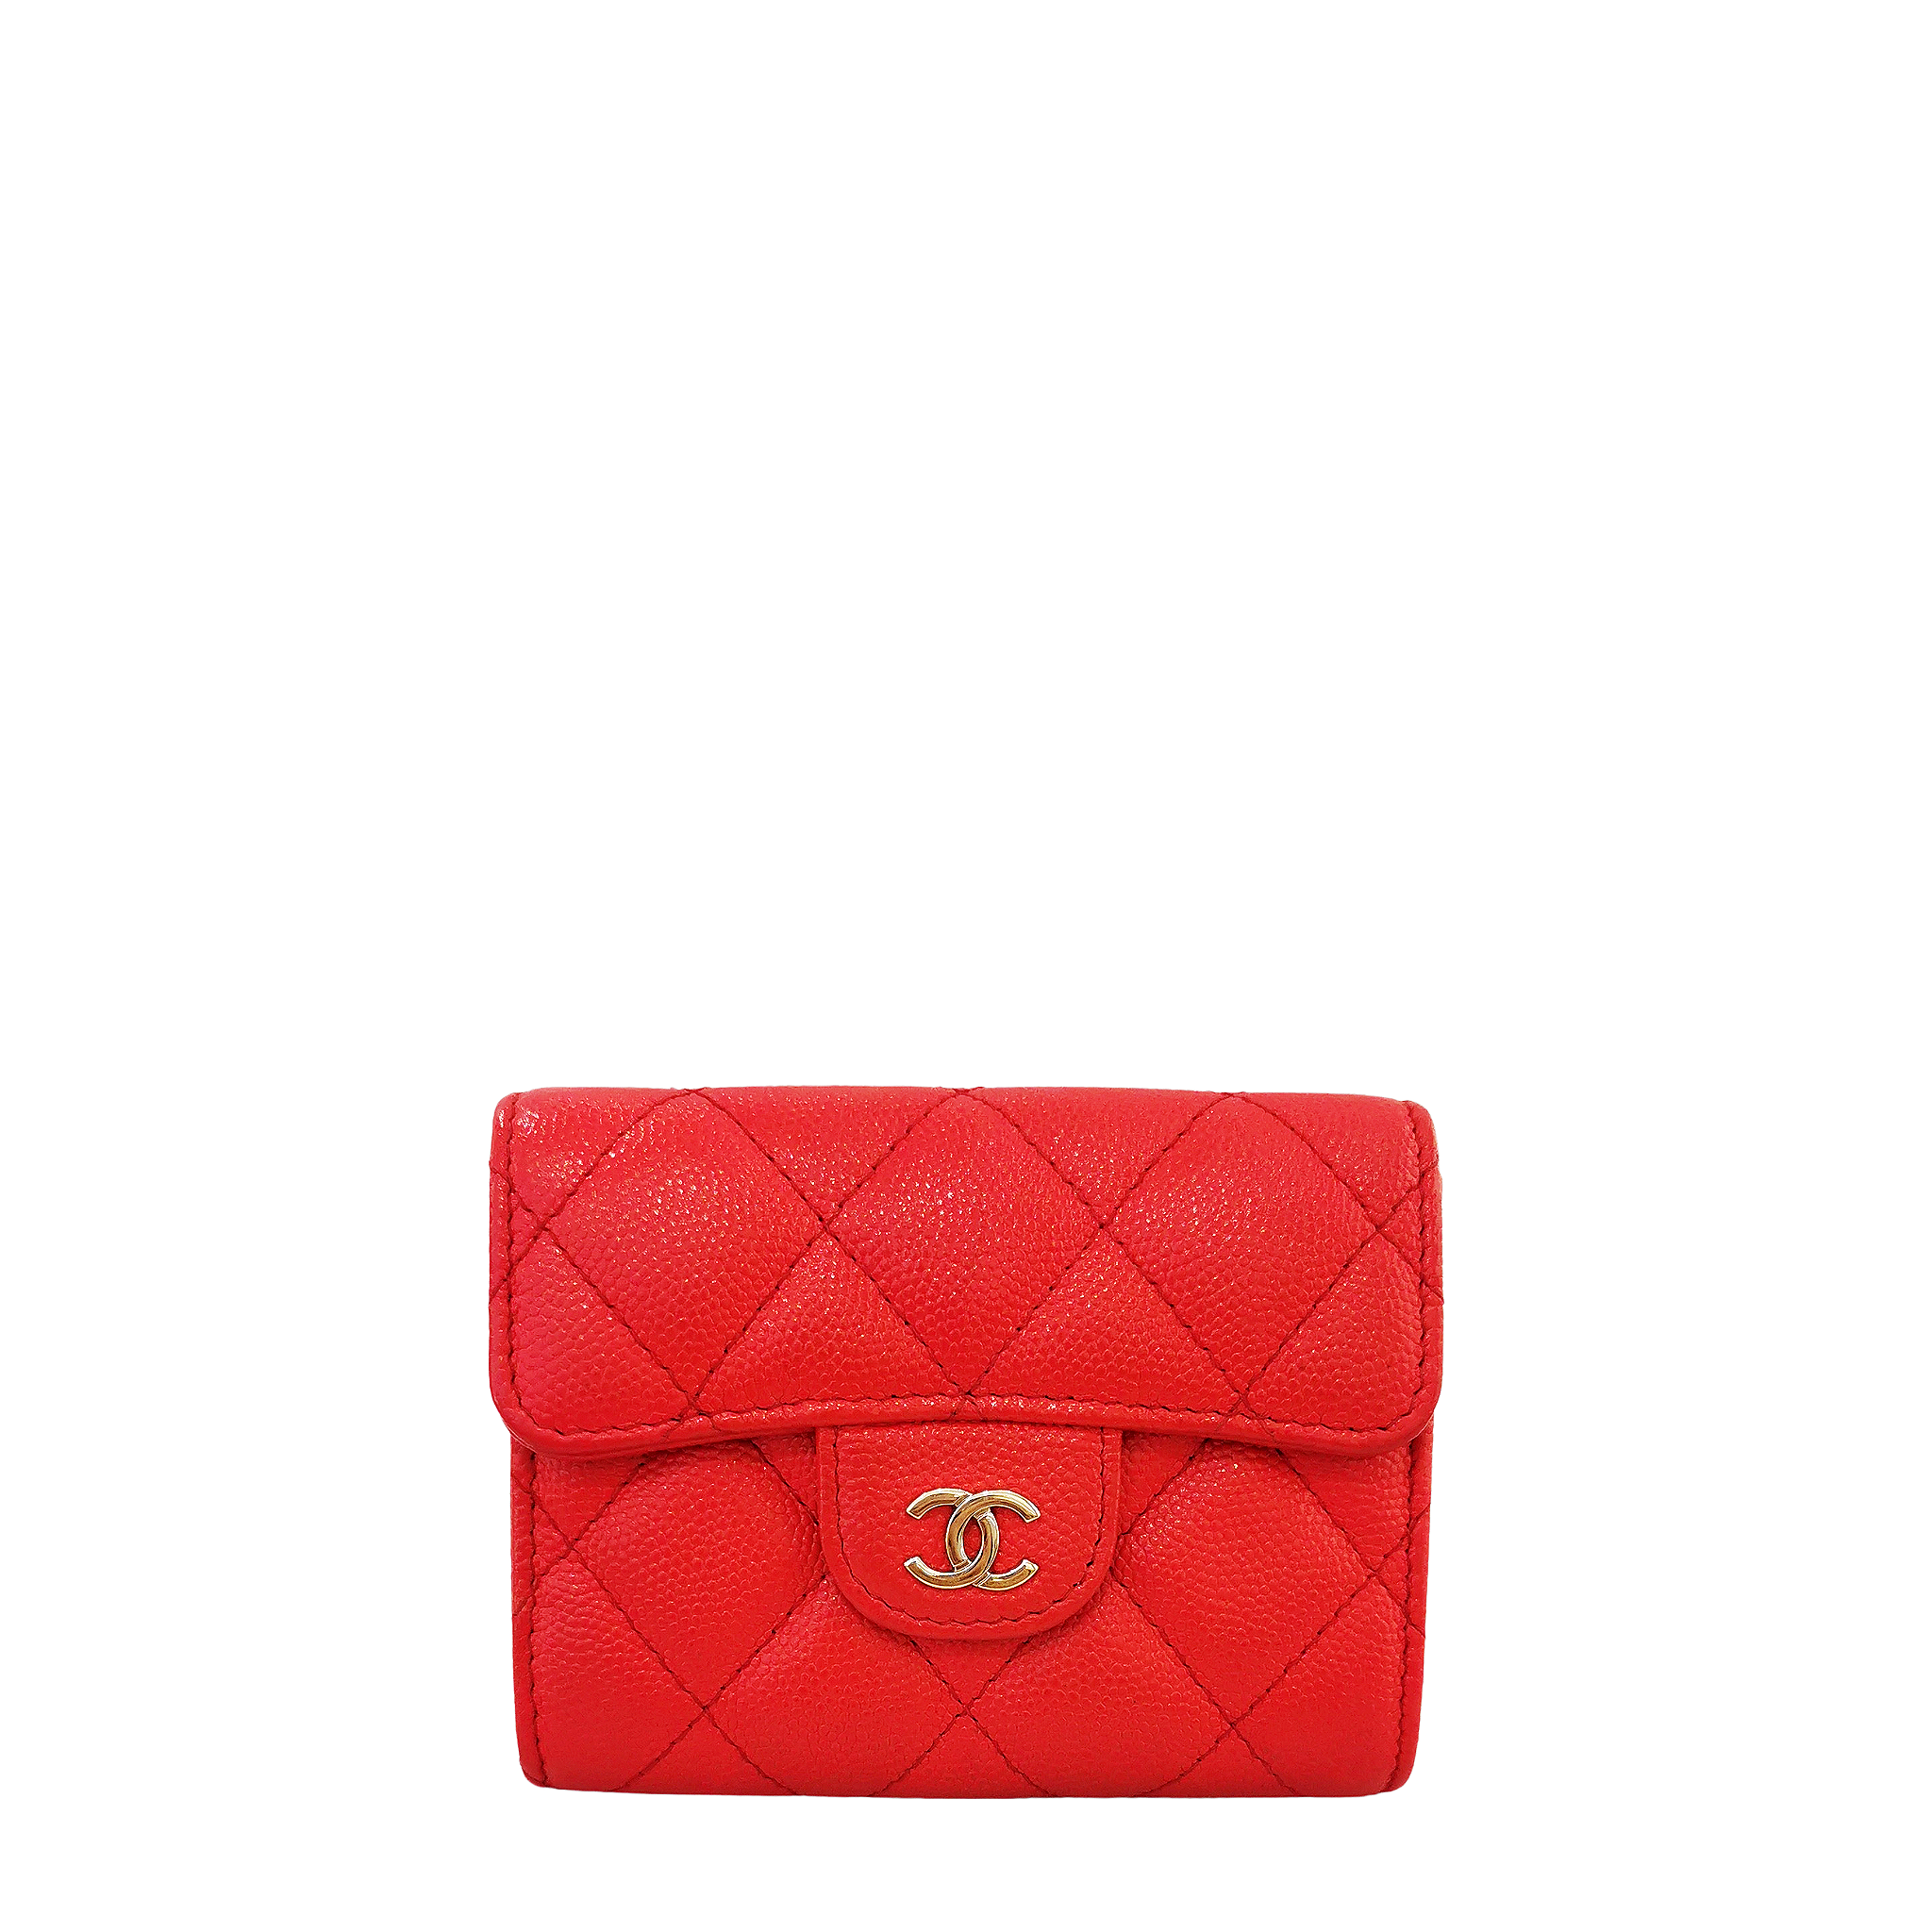 chanel inspired quilted bag